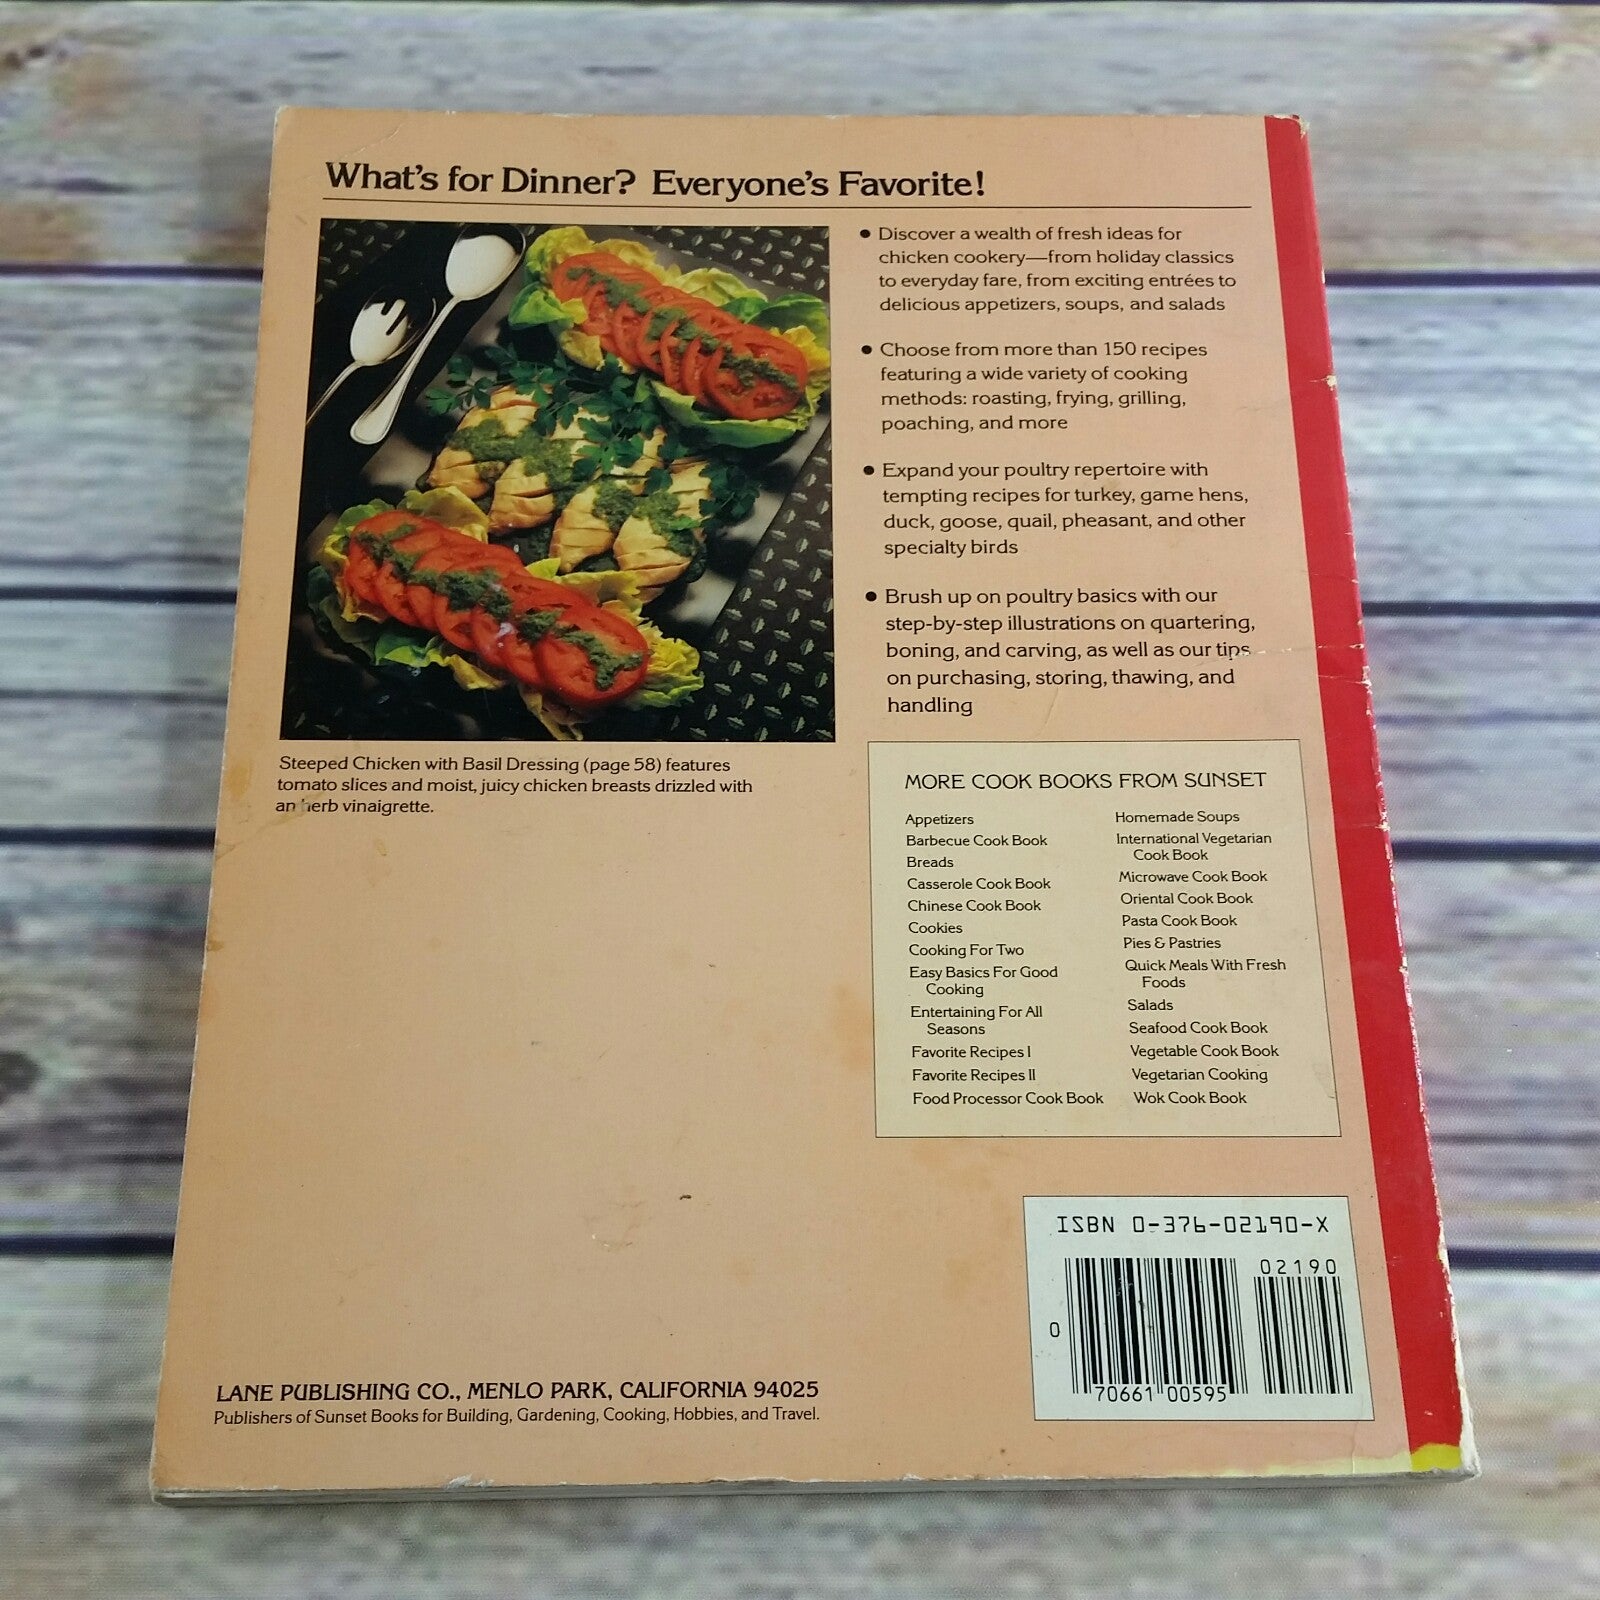 Vintage Cookbook Sunset Fresh Ways with Chicken Turkey Poultry 1986 Paperback Book Sunset Magazine - At Grandma's Table